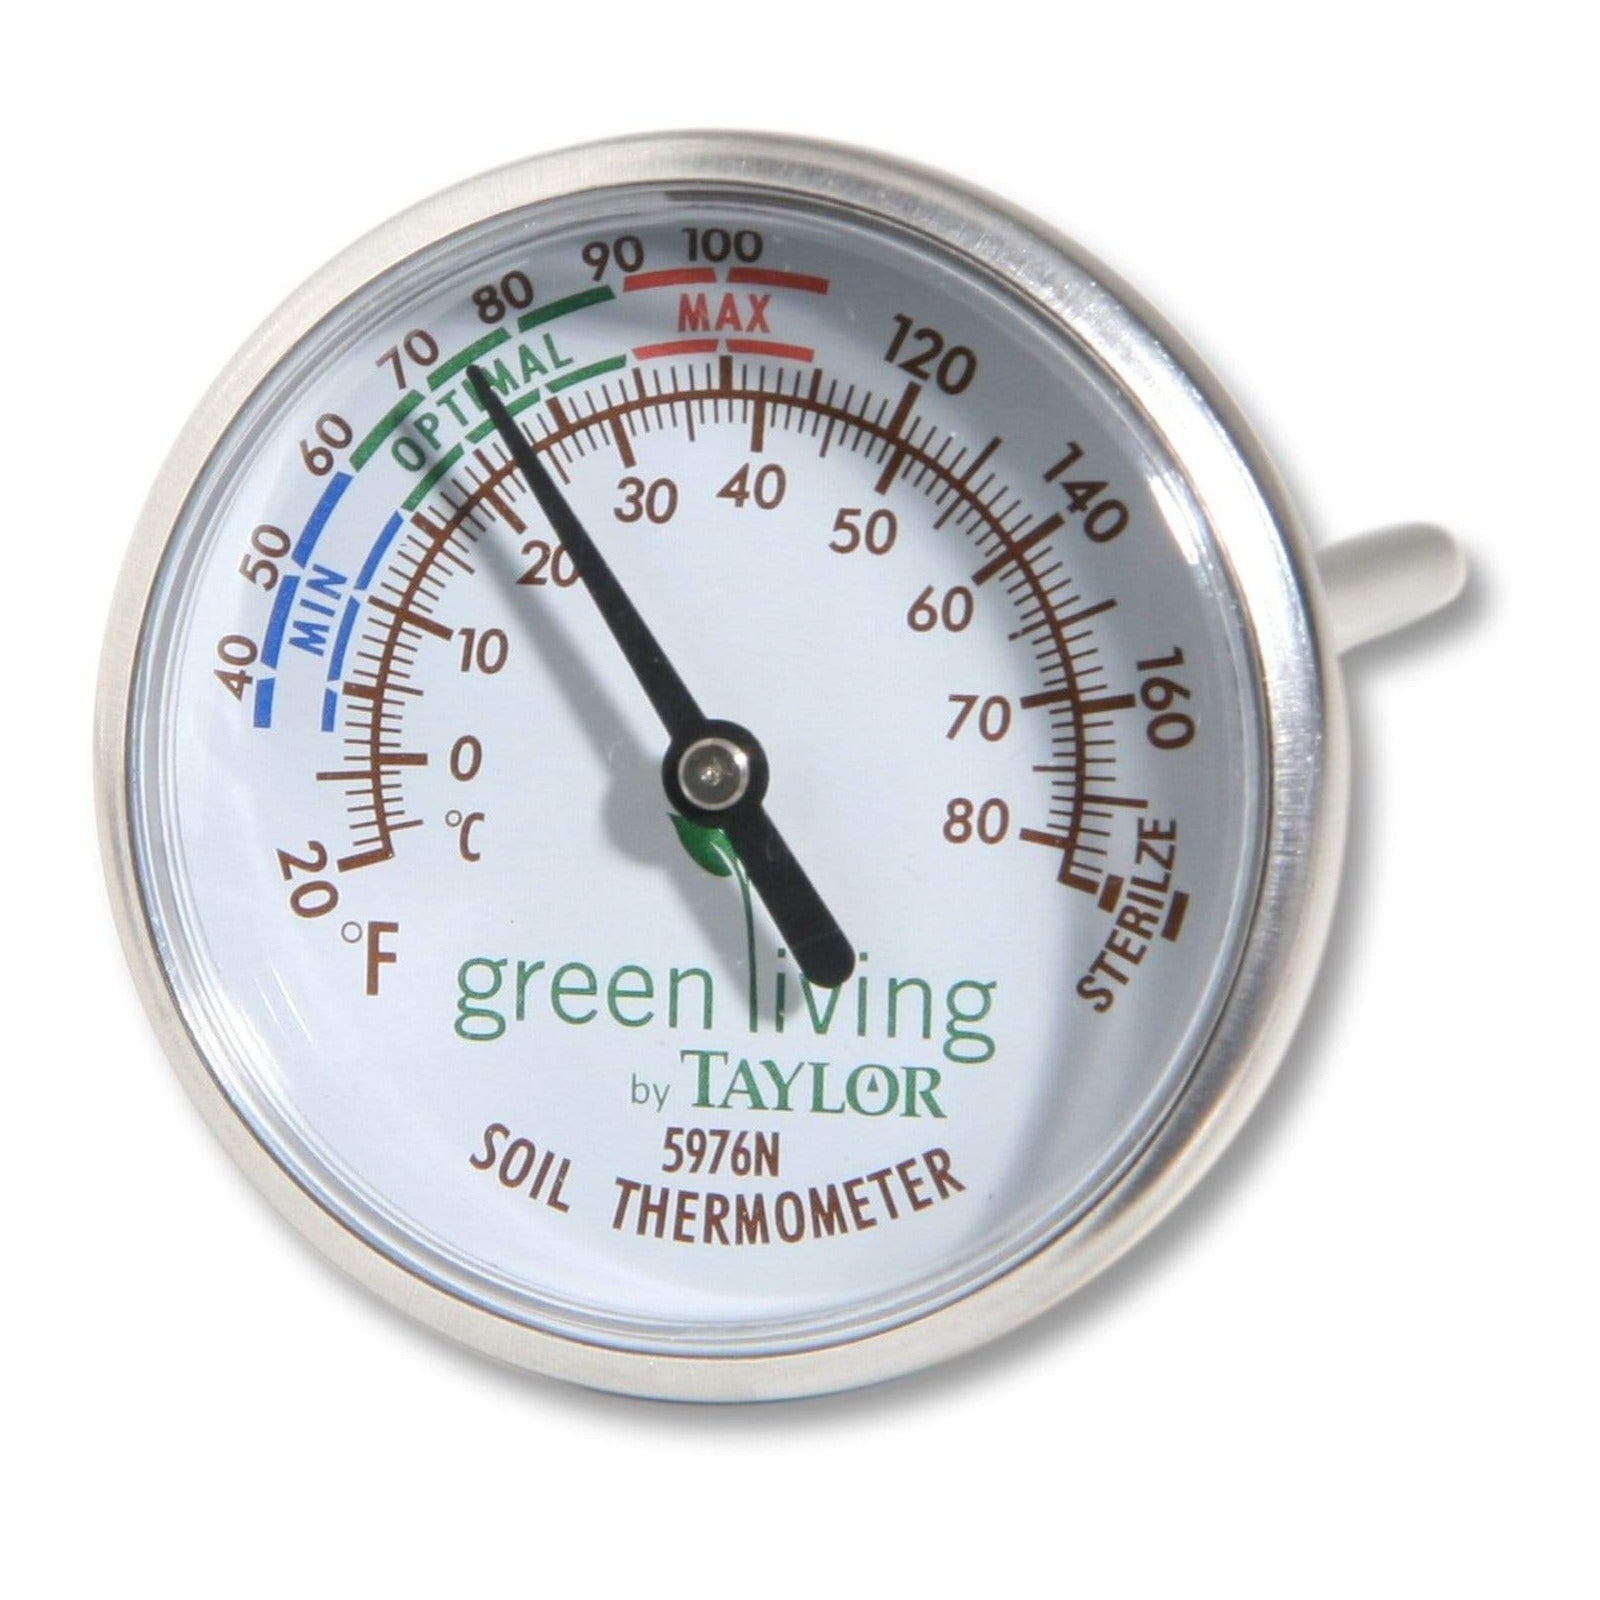 Soil thermometer - Soil temperature gauge for sowing